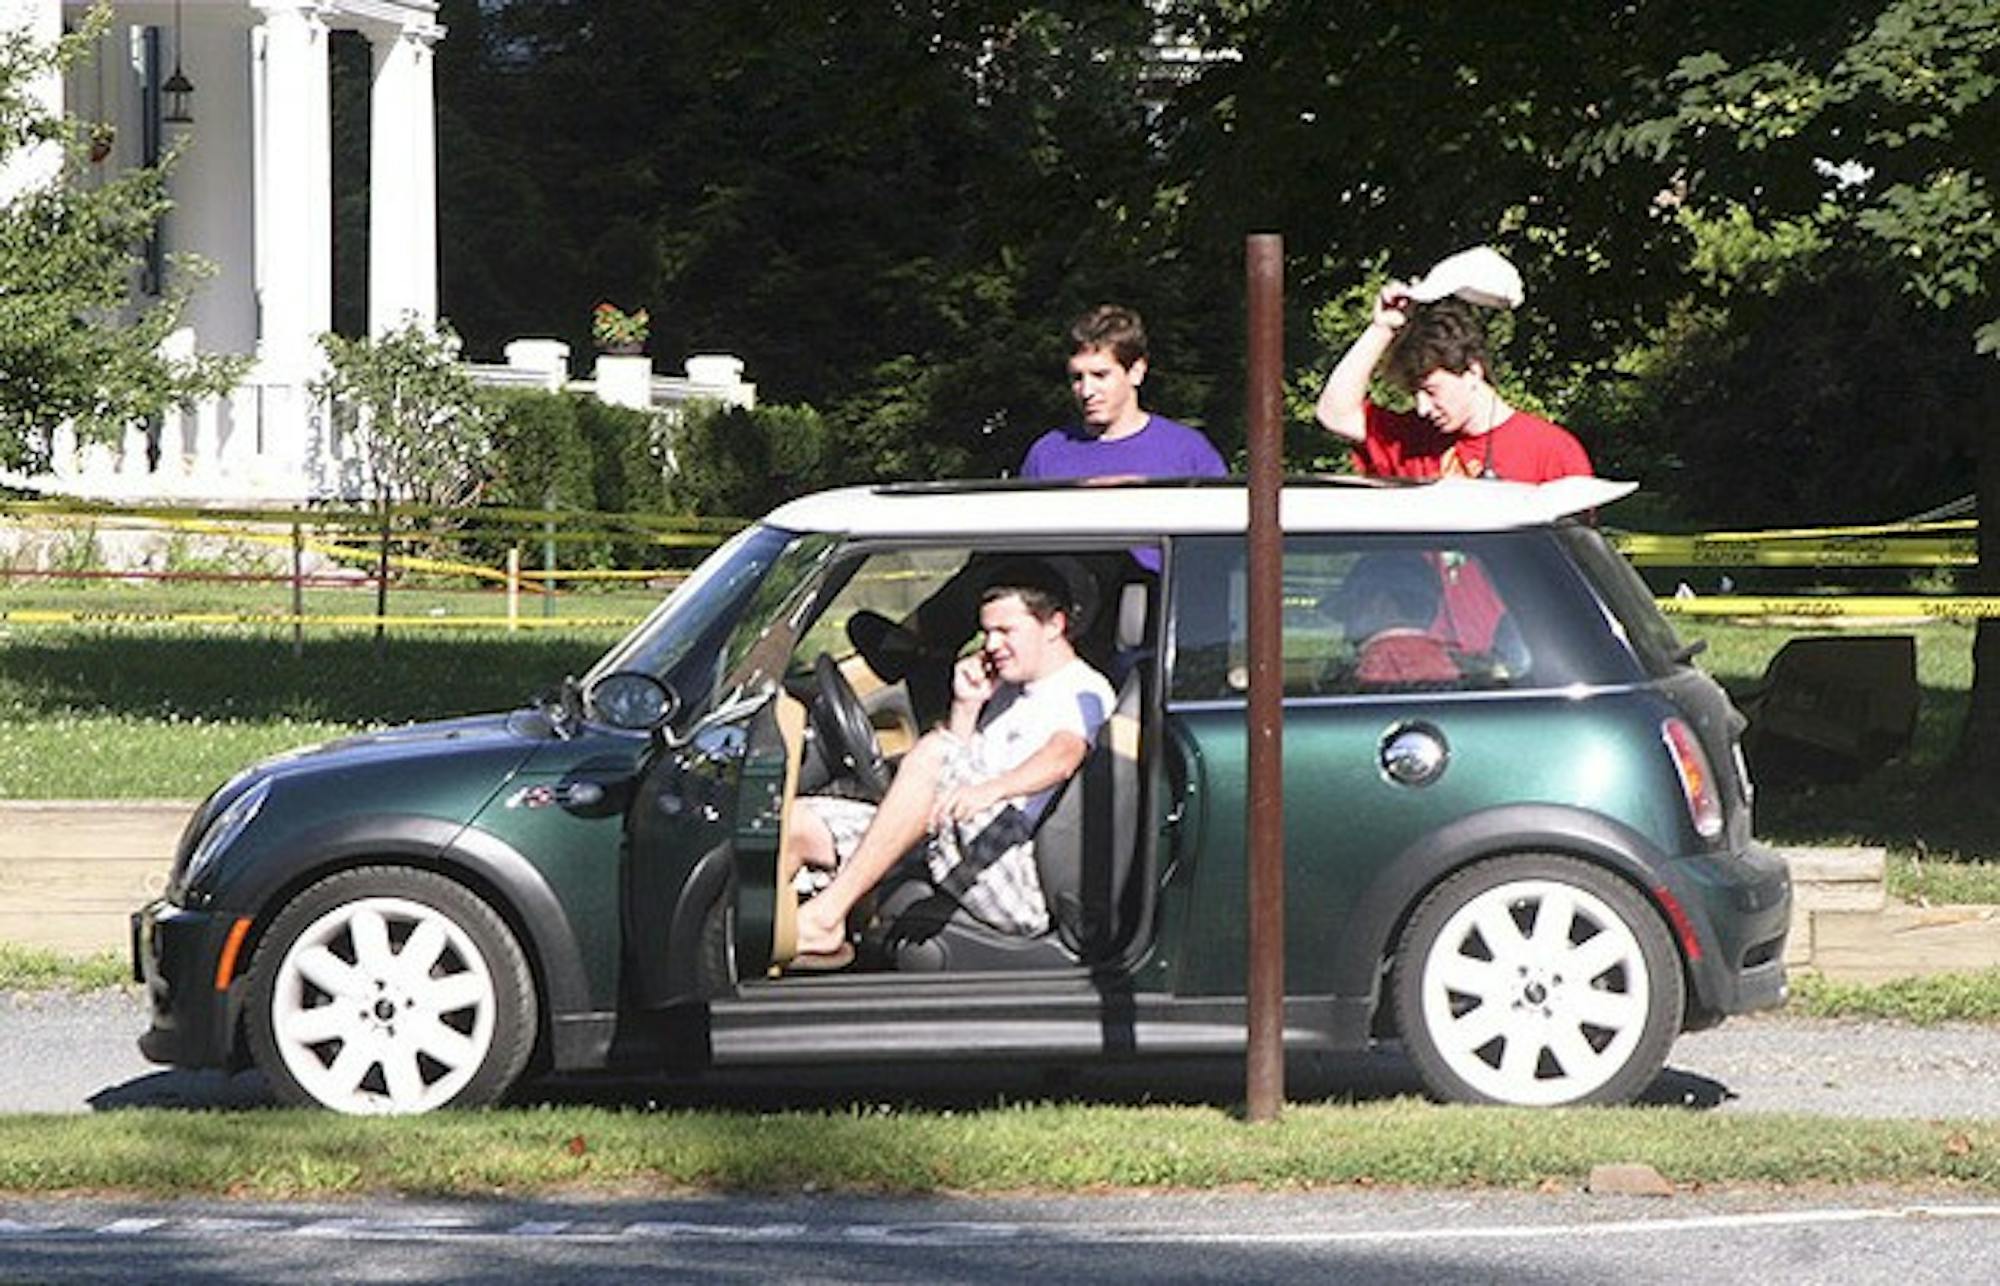 EVERYONE SQUEEZE IN: Five sophomores attempt to pile into a Mini Cooper on Webster Avenue.